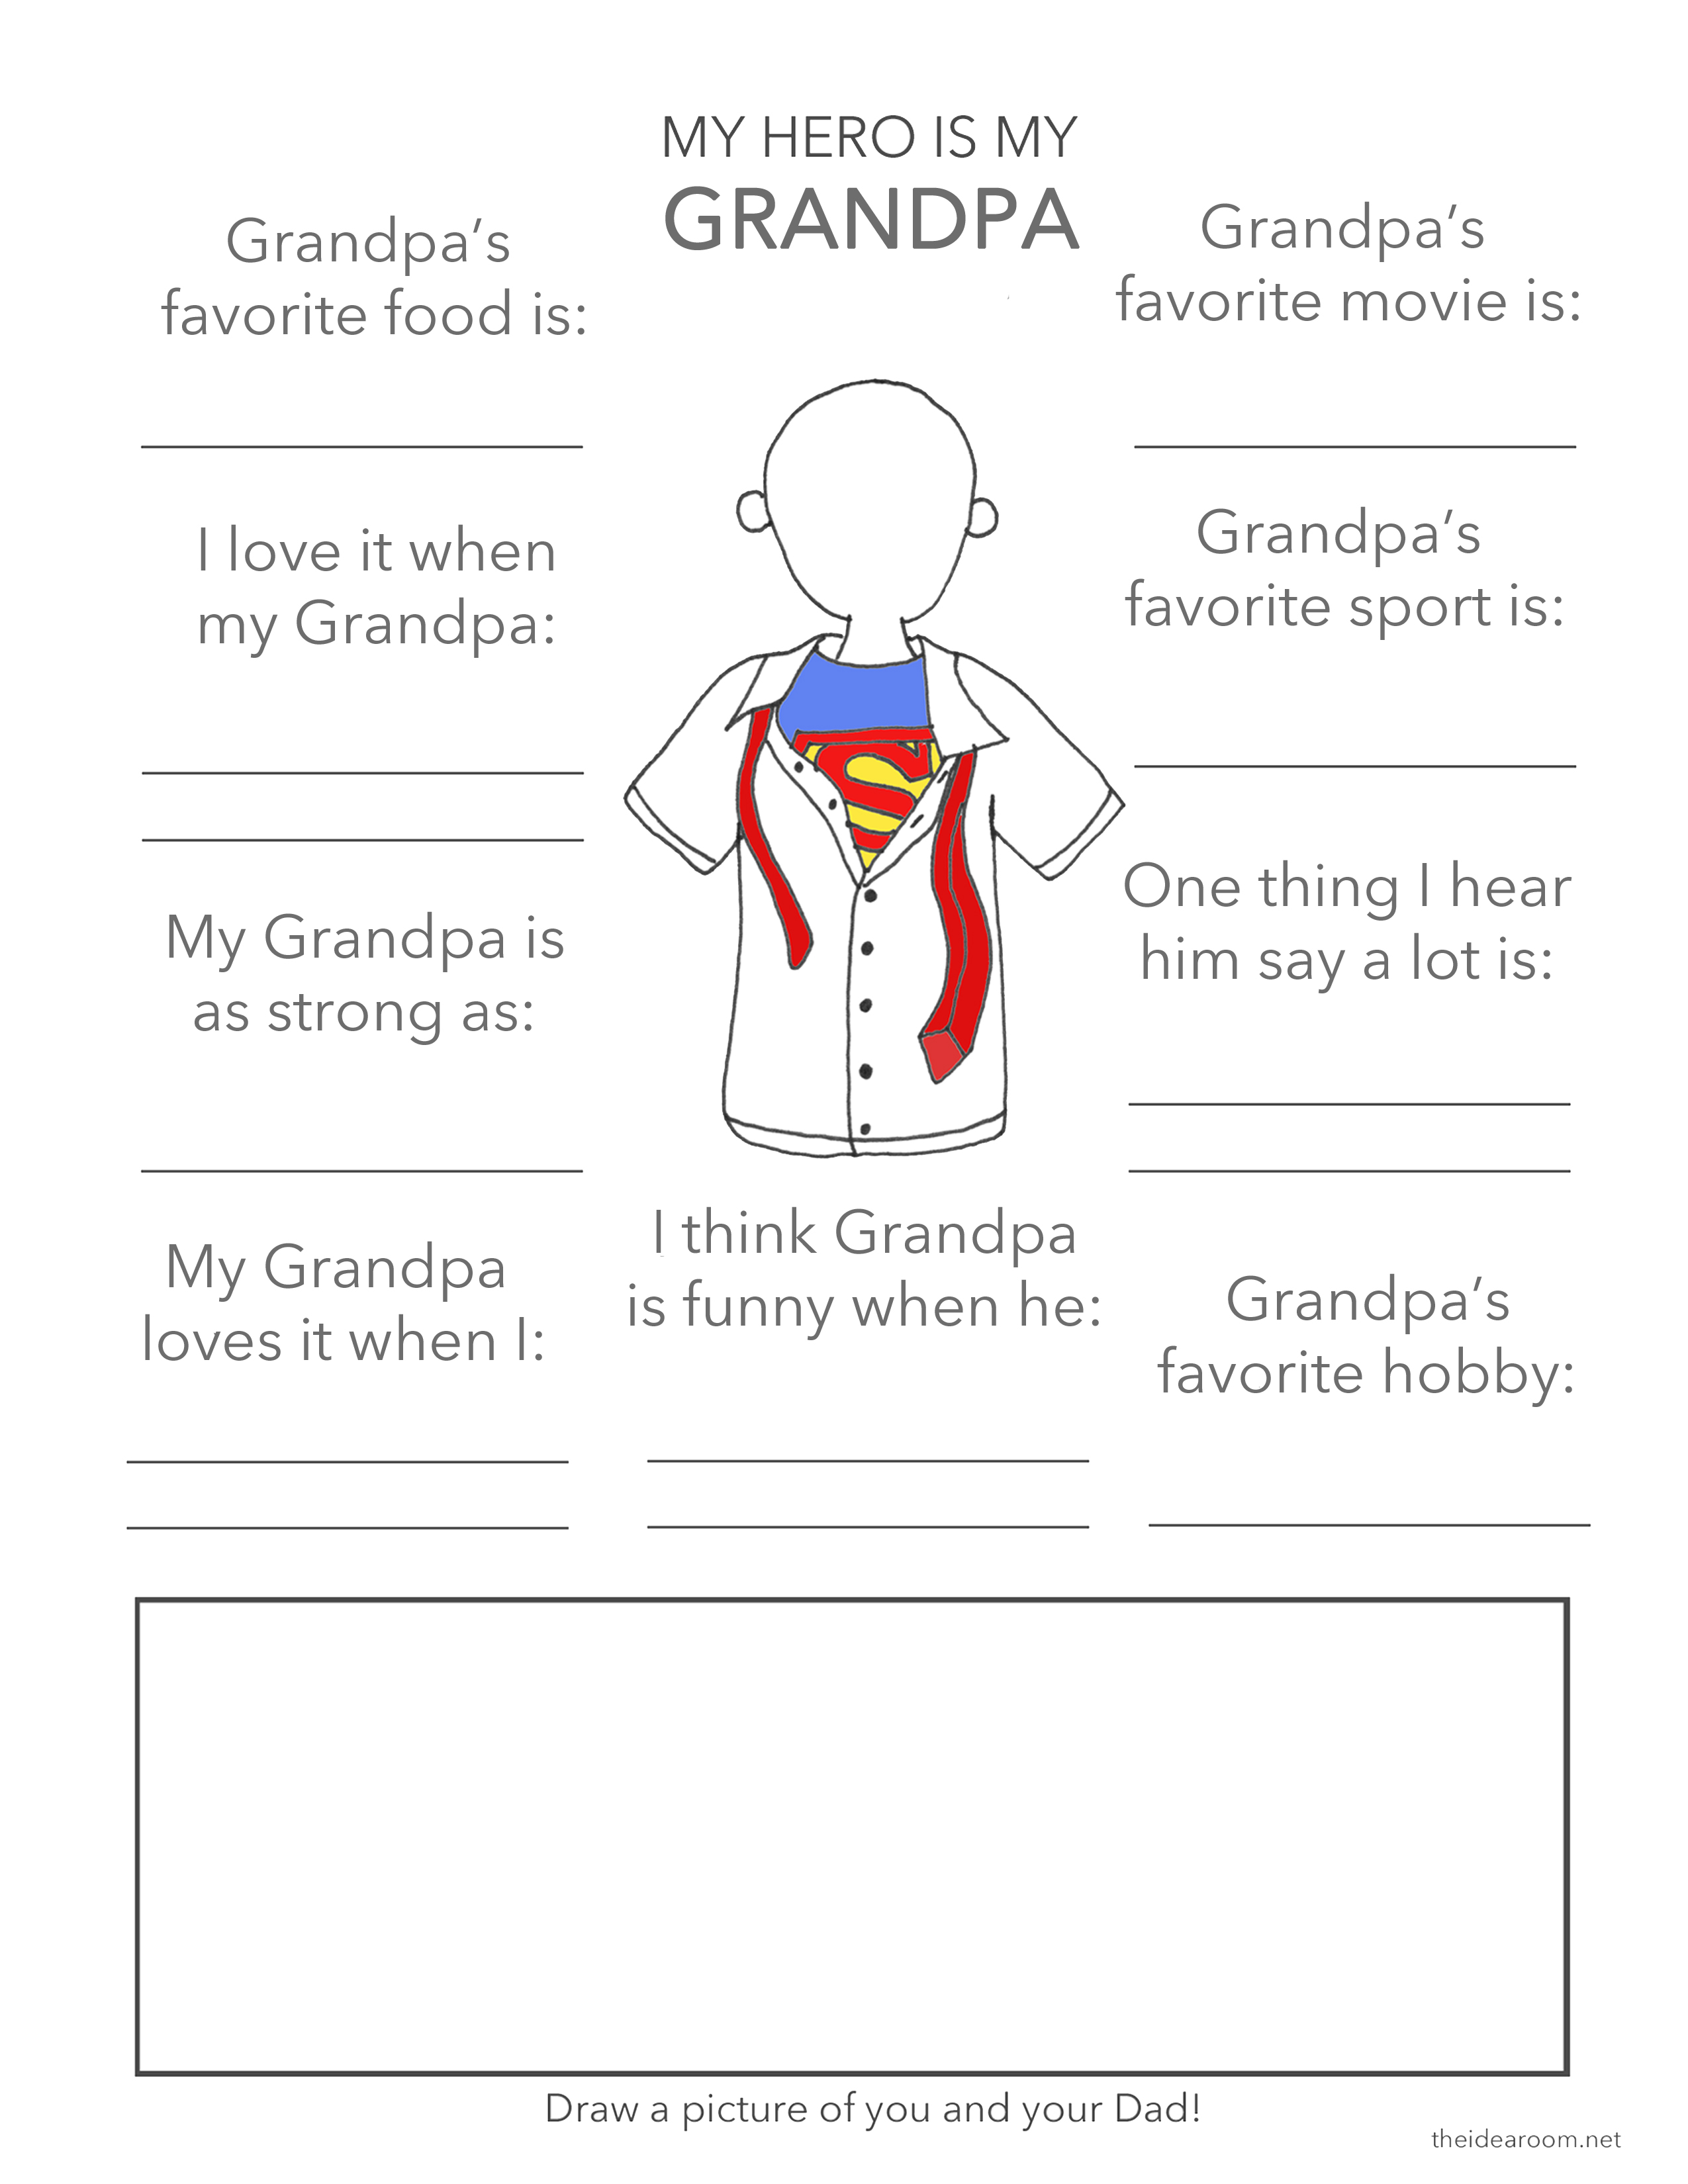 Fun facts fathers day printable